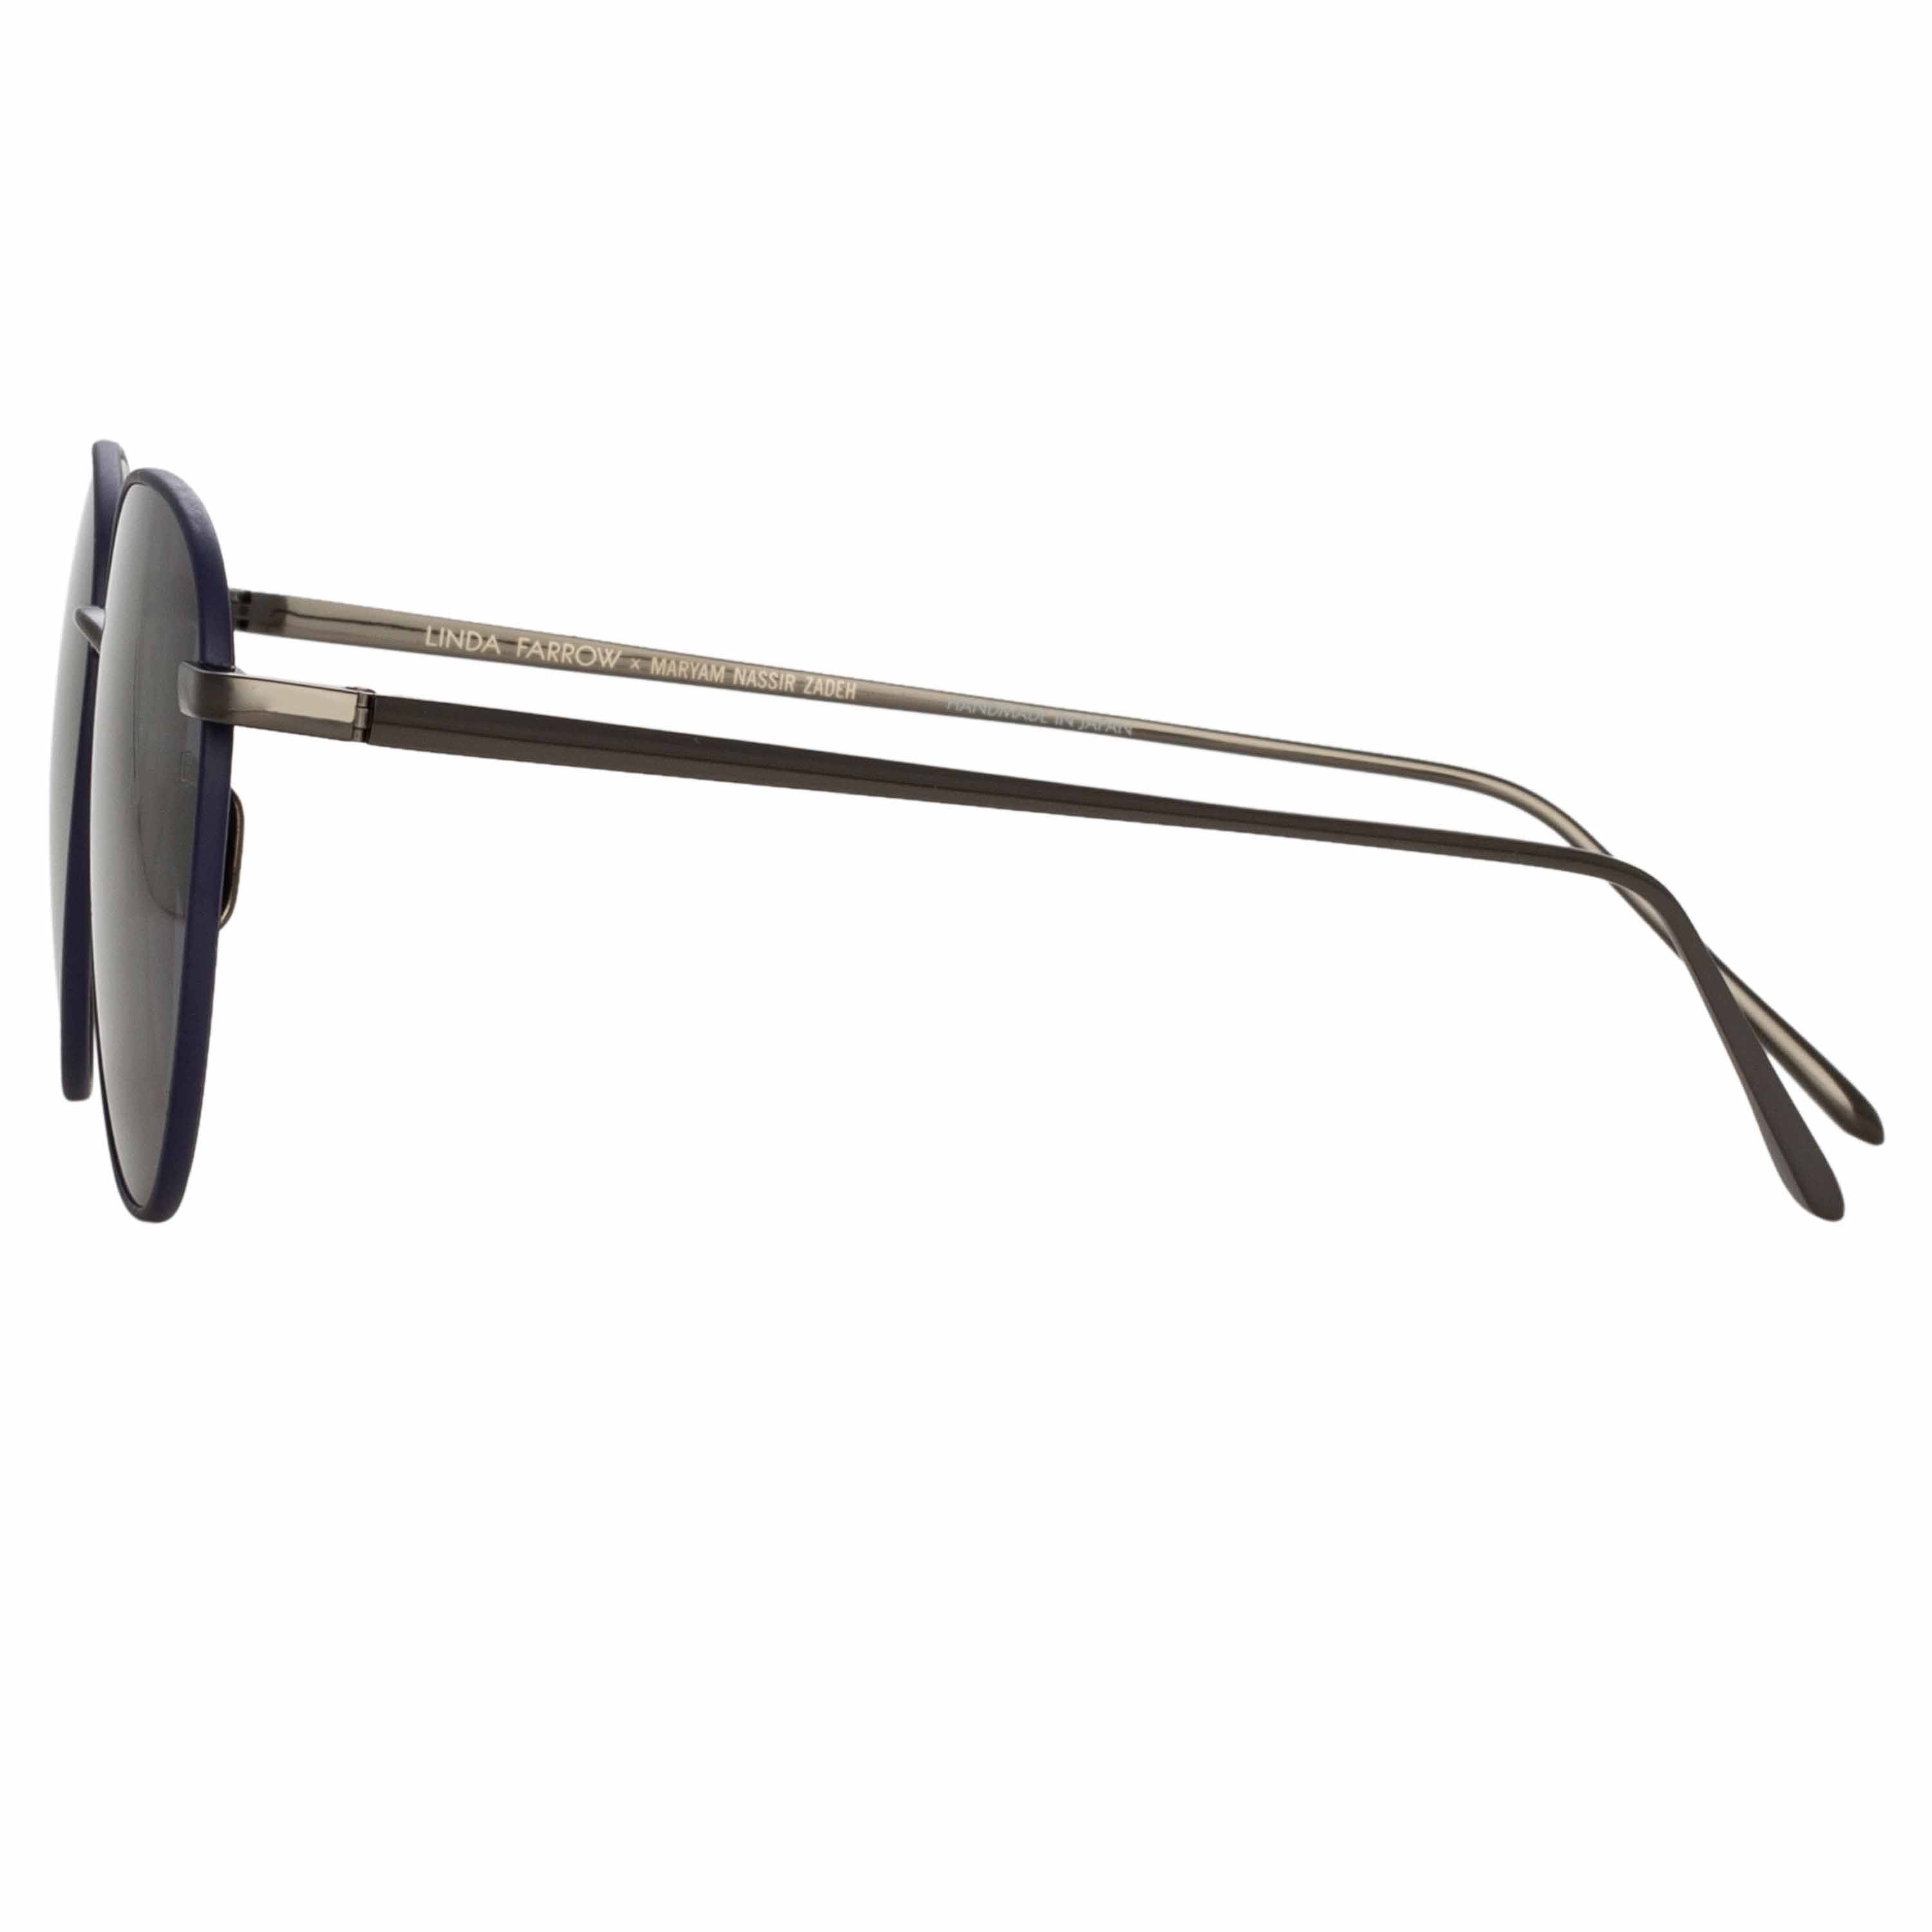 Color_LFL819C28SUN - Raif Square Sunglasses in Nickel and Navy